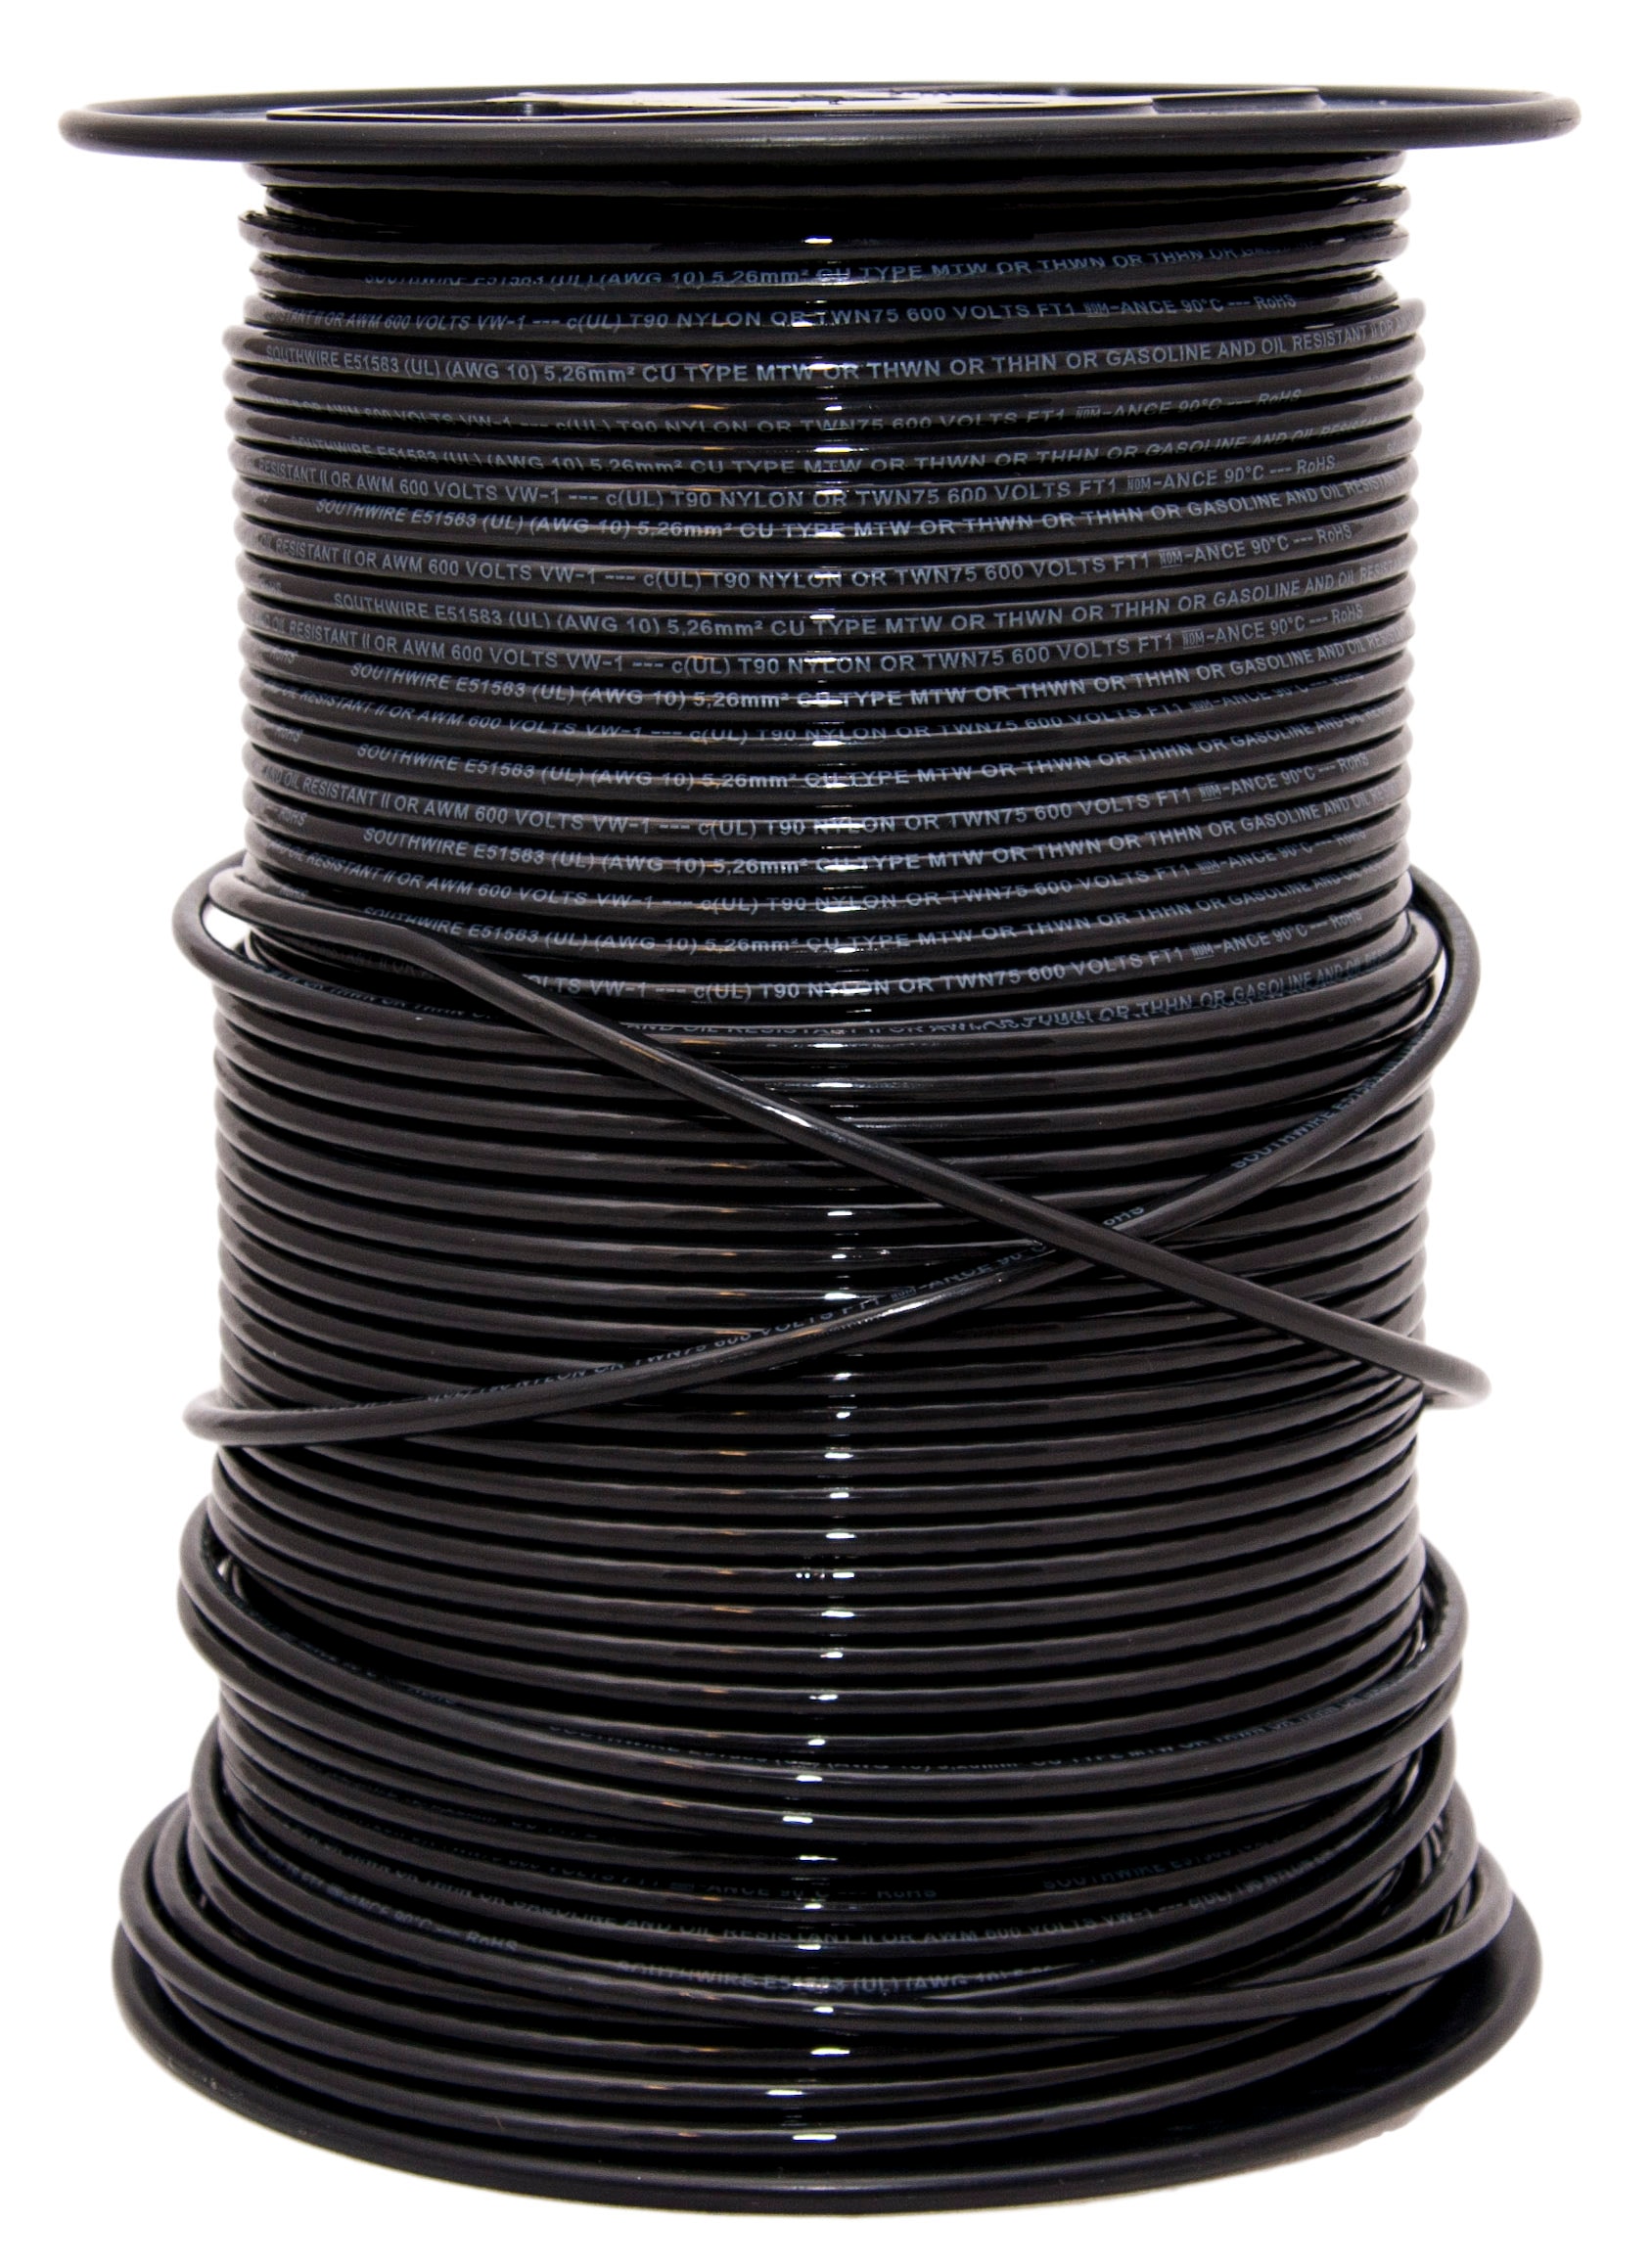 Southwire SIMpull 500-ft 6-AWG Stranded Black Copper Thhn Wire (By